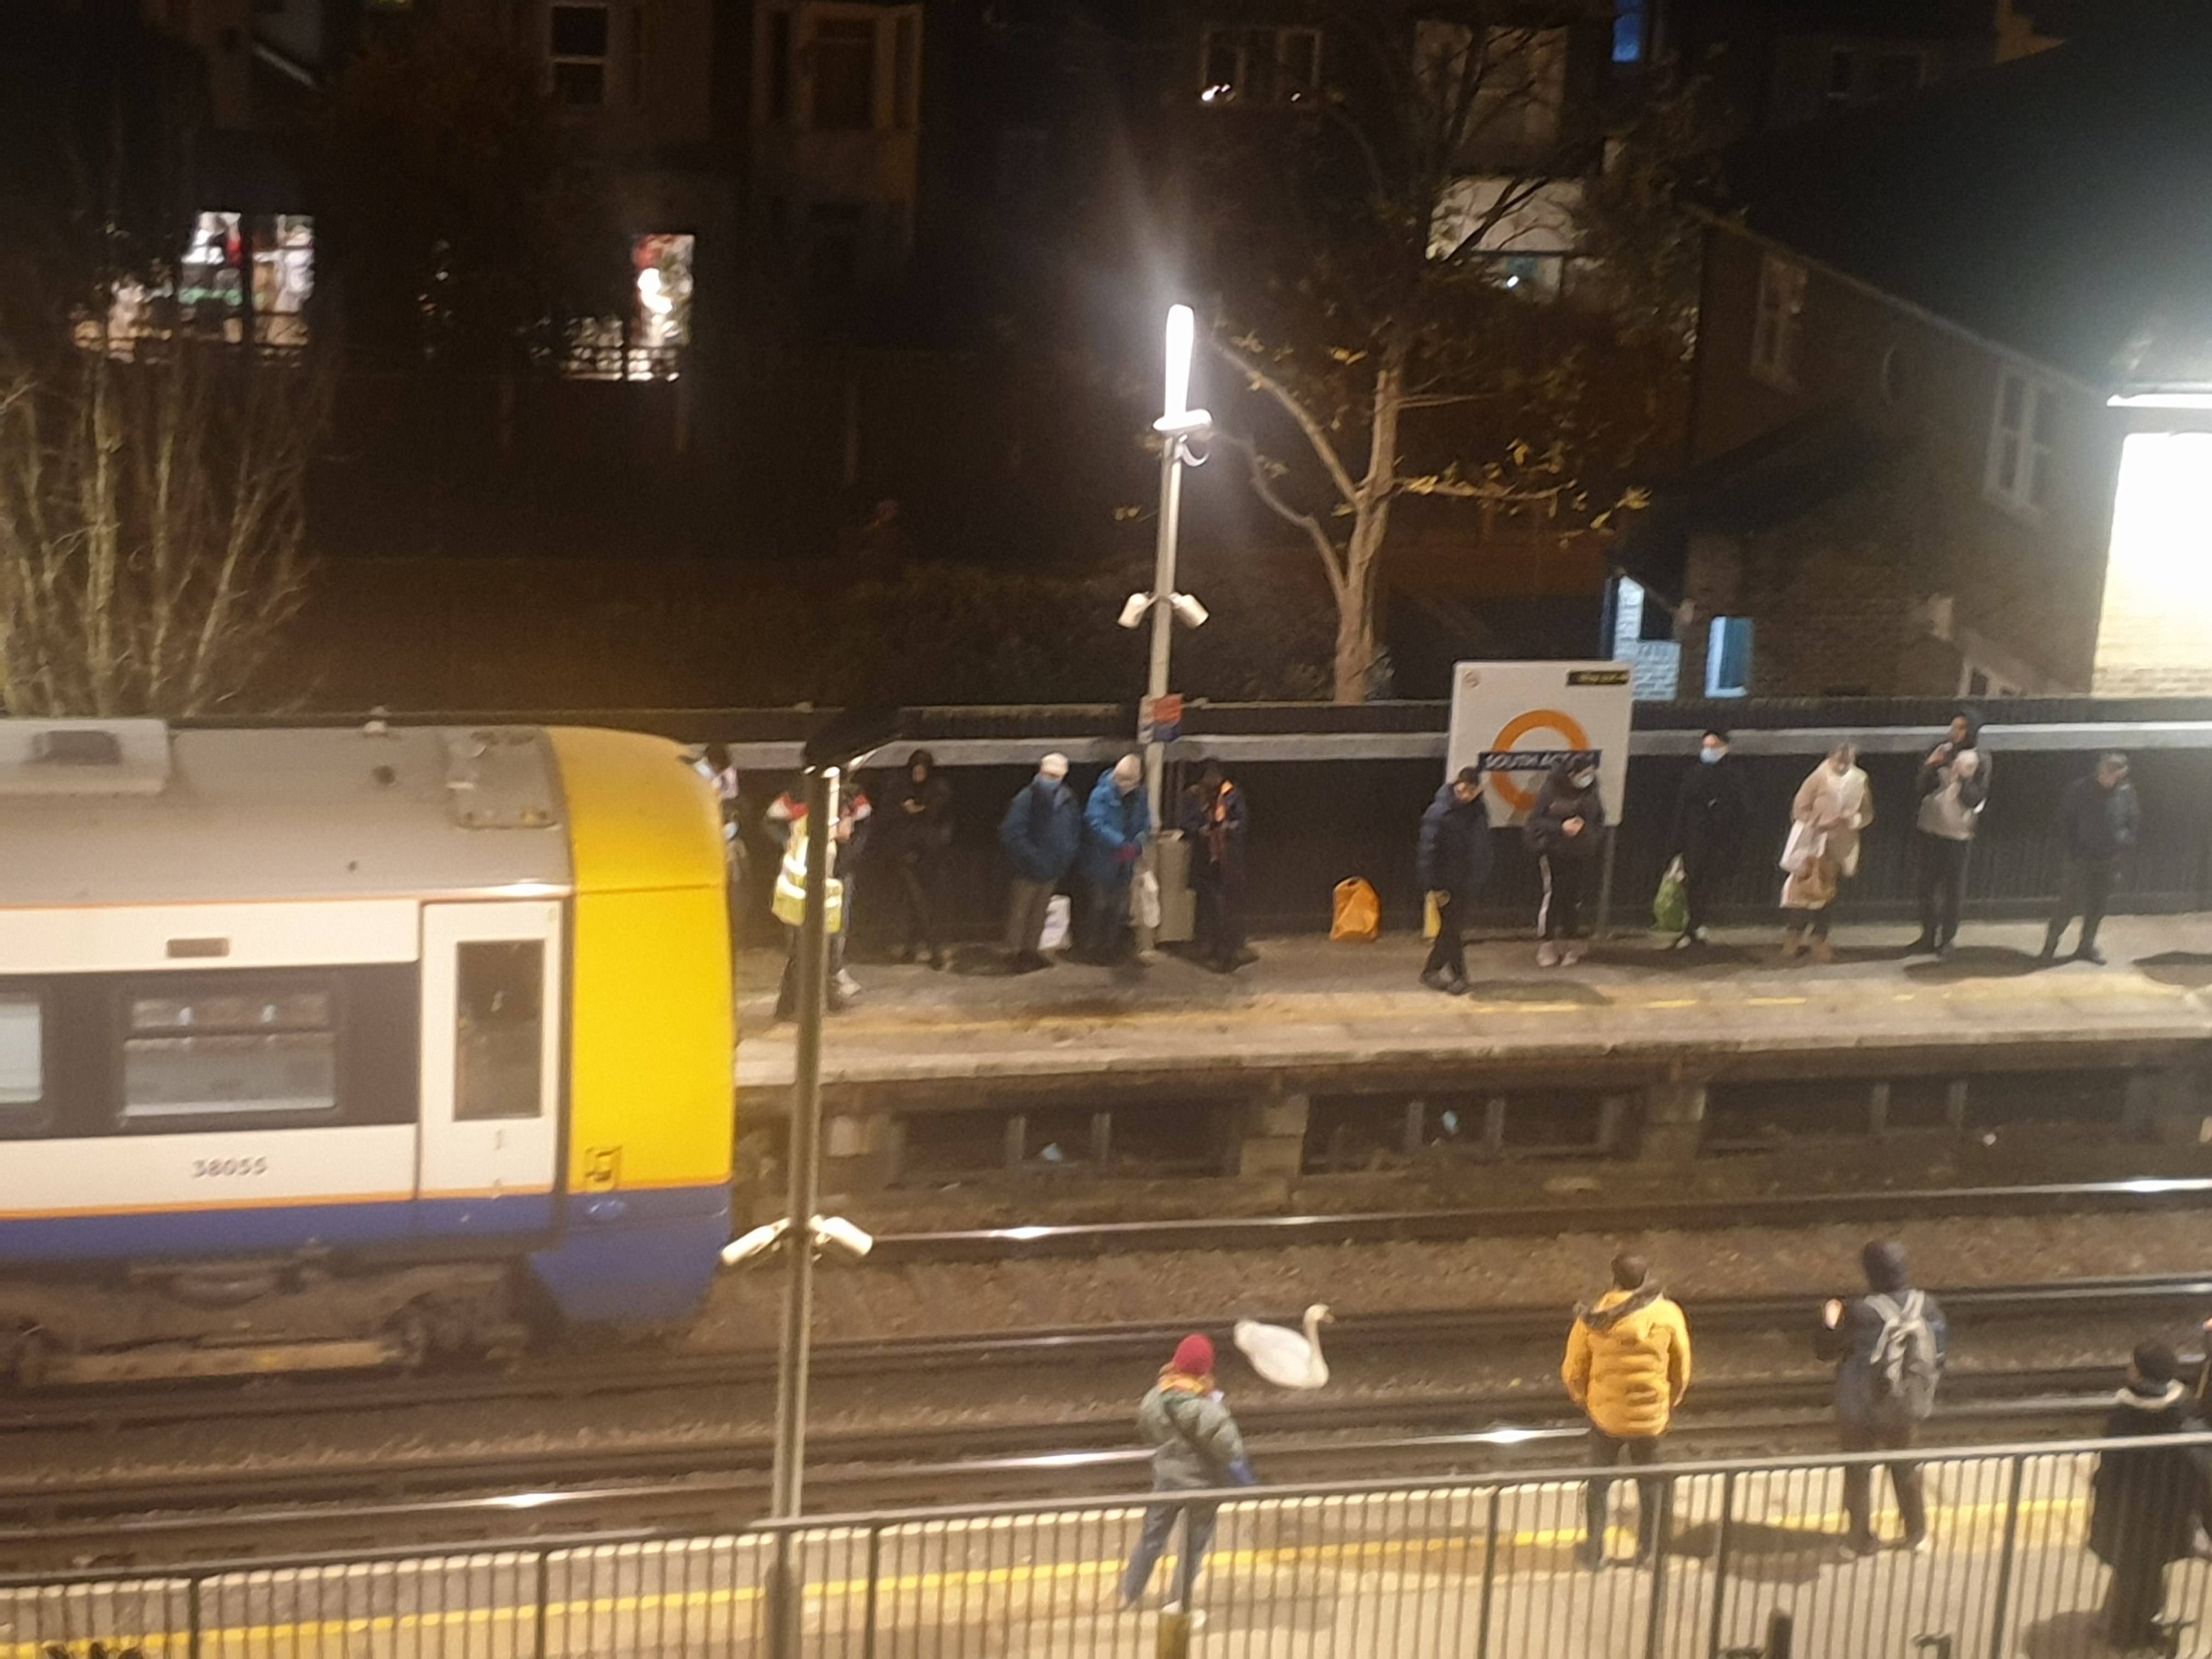 An injured swan had to be rescued after it fell onto the tracks at a West London station, causing hours of delays.